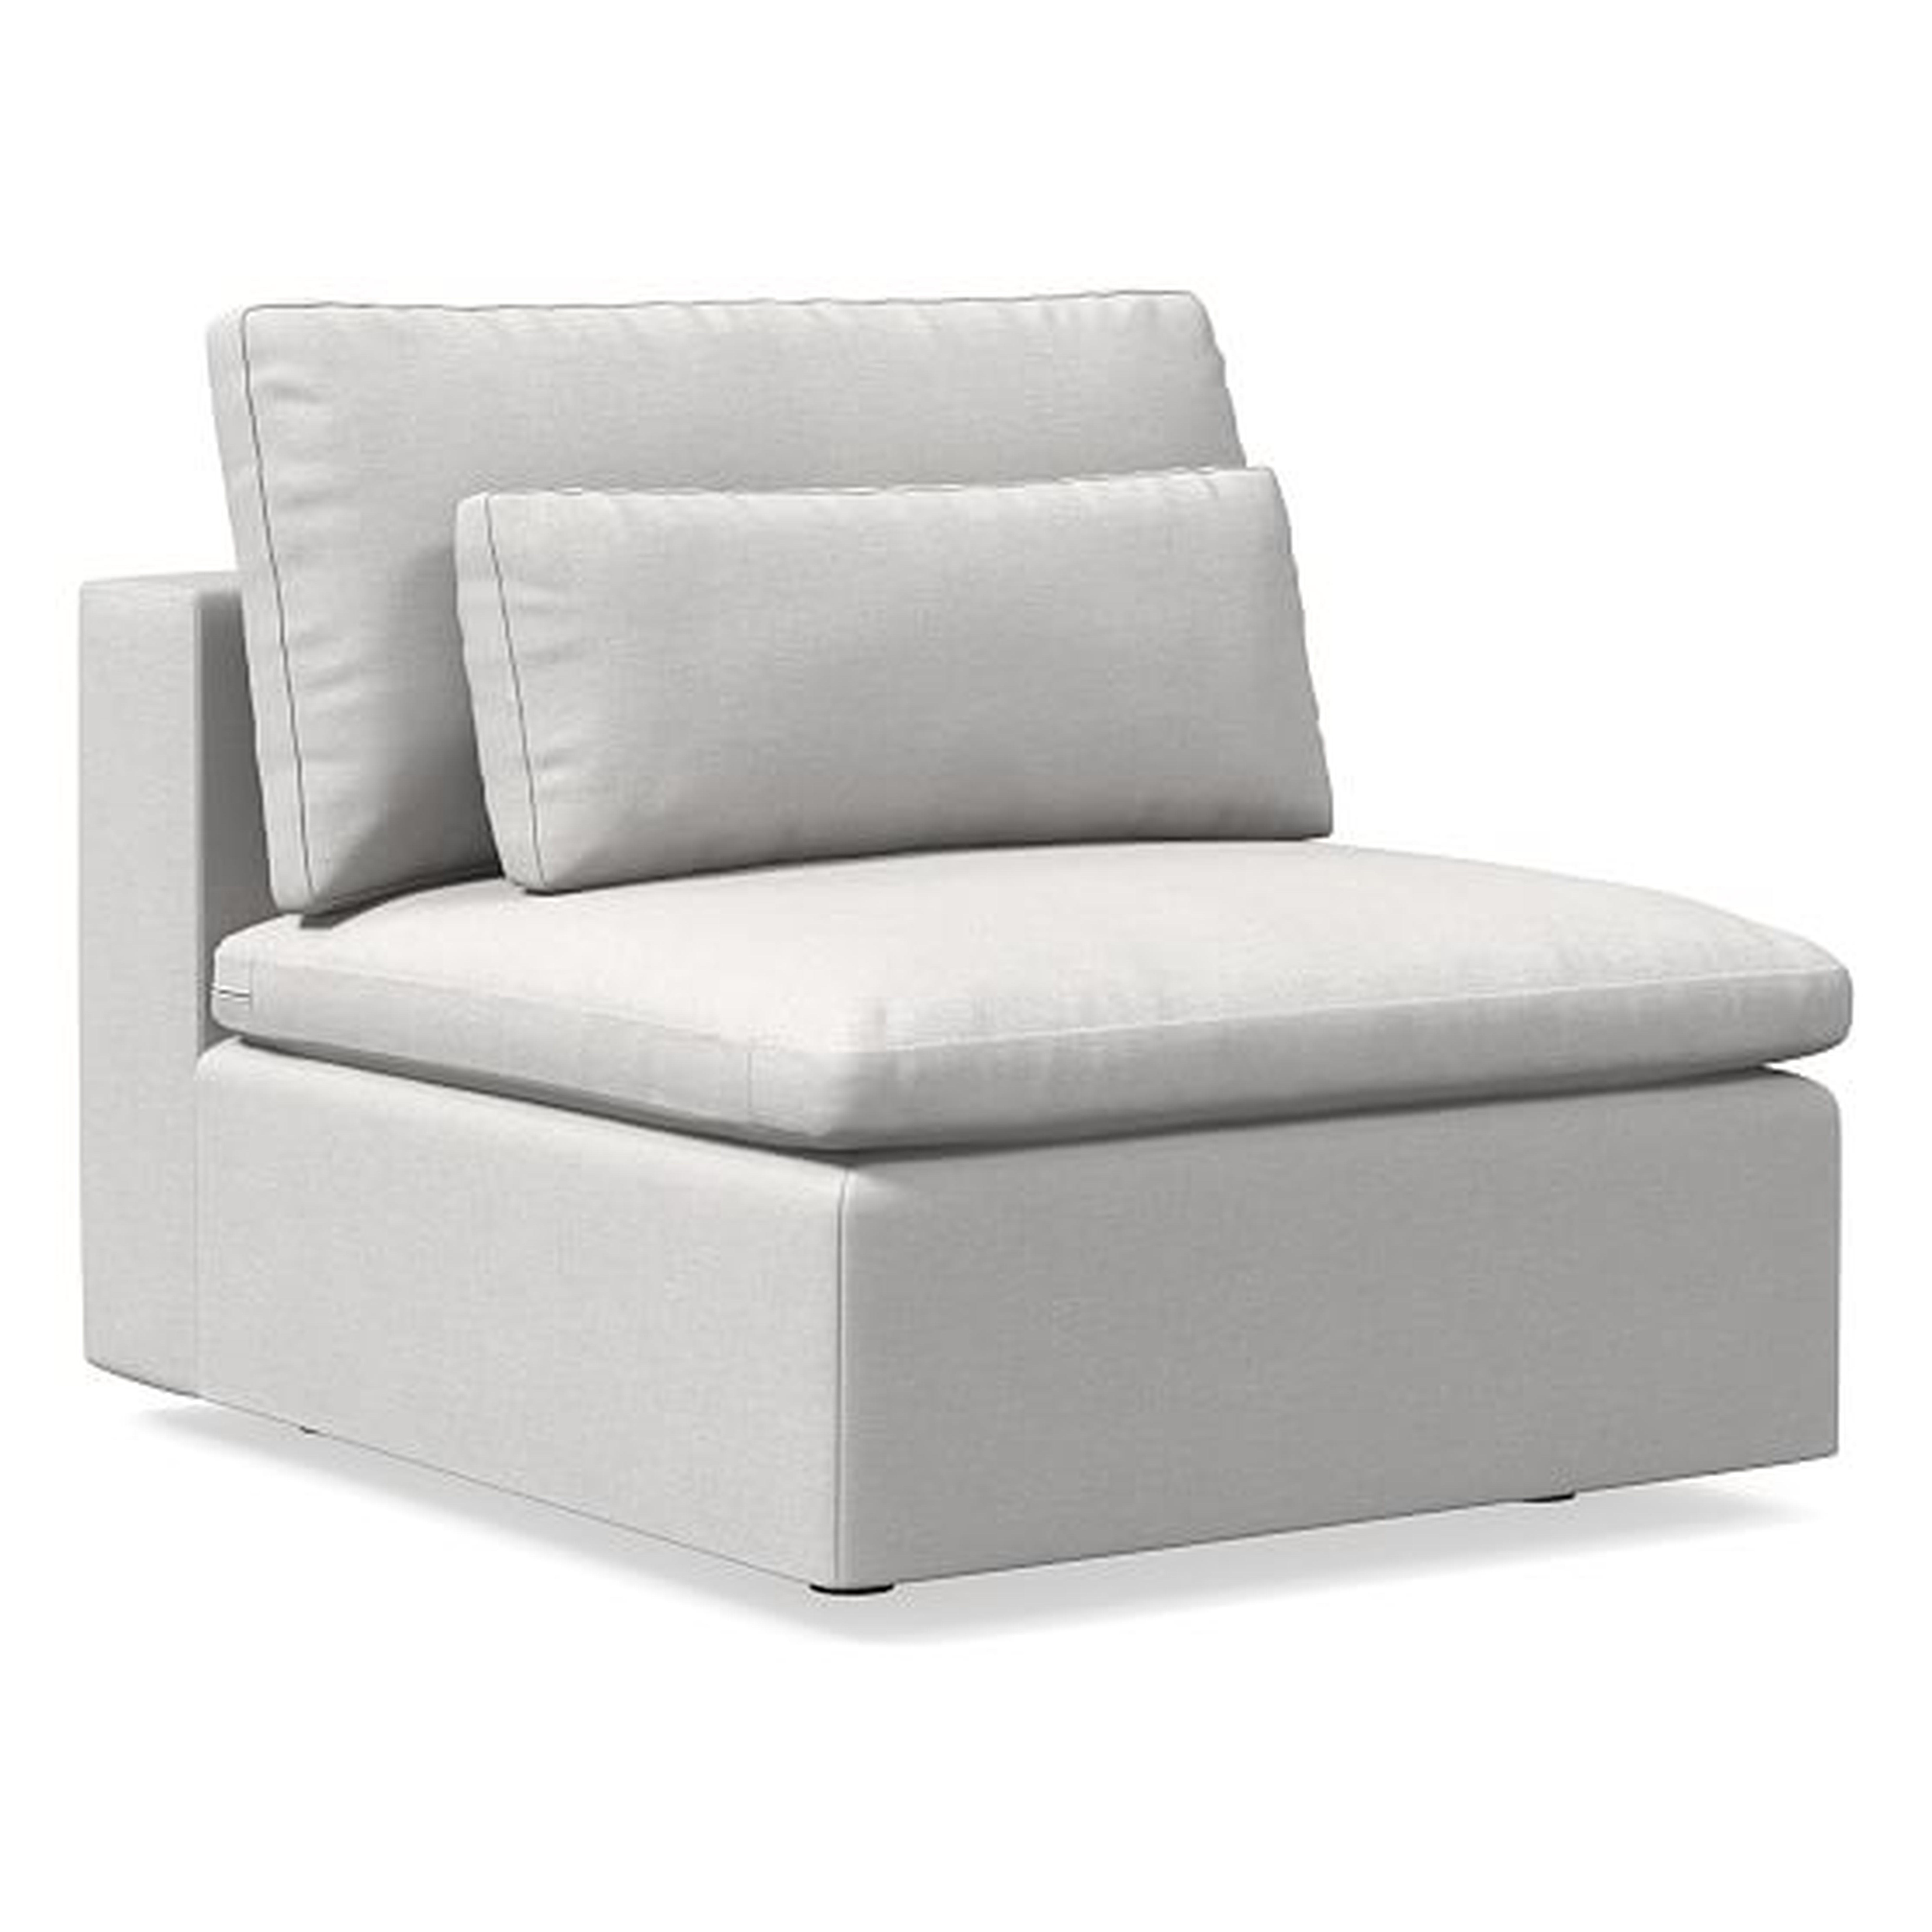 Harmony Modular Armless Single, Down, Eco Weave, Oyster, Concealed Supports - West Elm